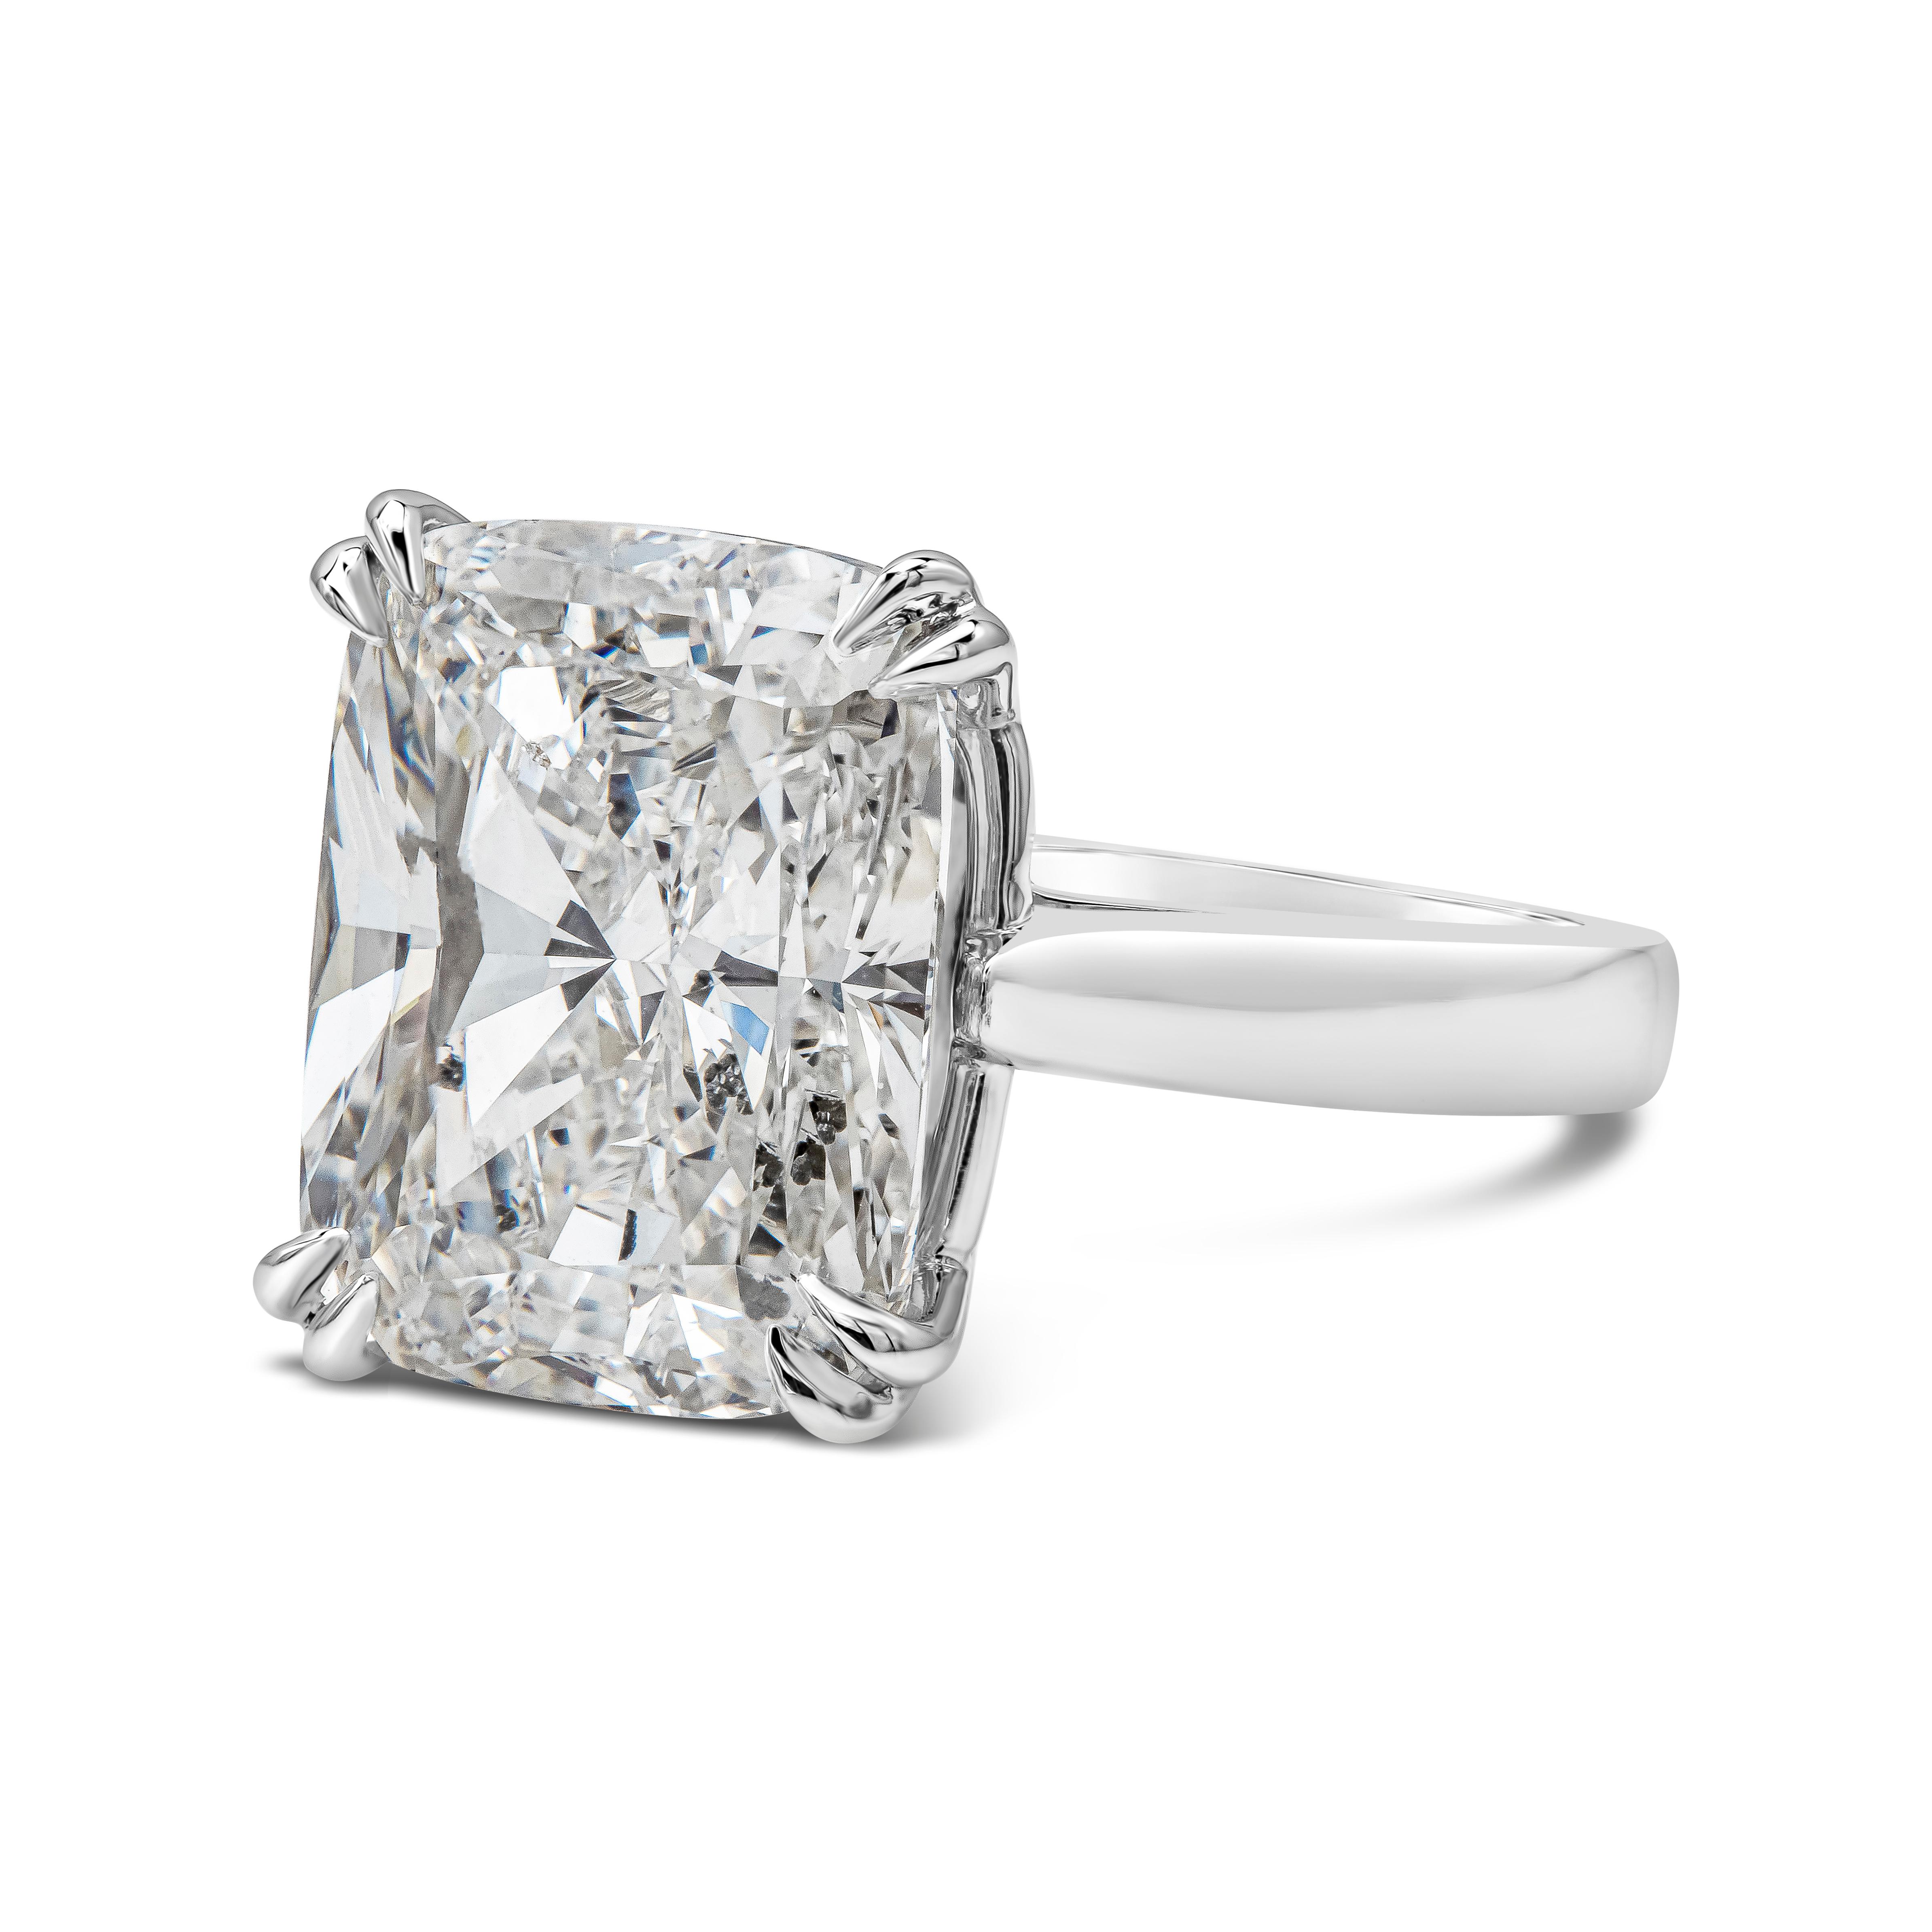 A classic solitaire engagement ring style showcasing an elongated cushion cut diamond weighing 7.76 carats total. The diamond was certified by GIA as F color, SI2 clarity. Made in platinum. Size 6 US resizable upon request.
